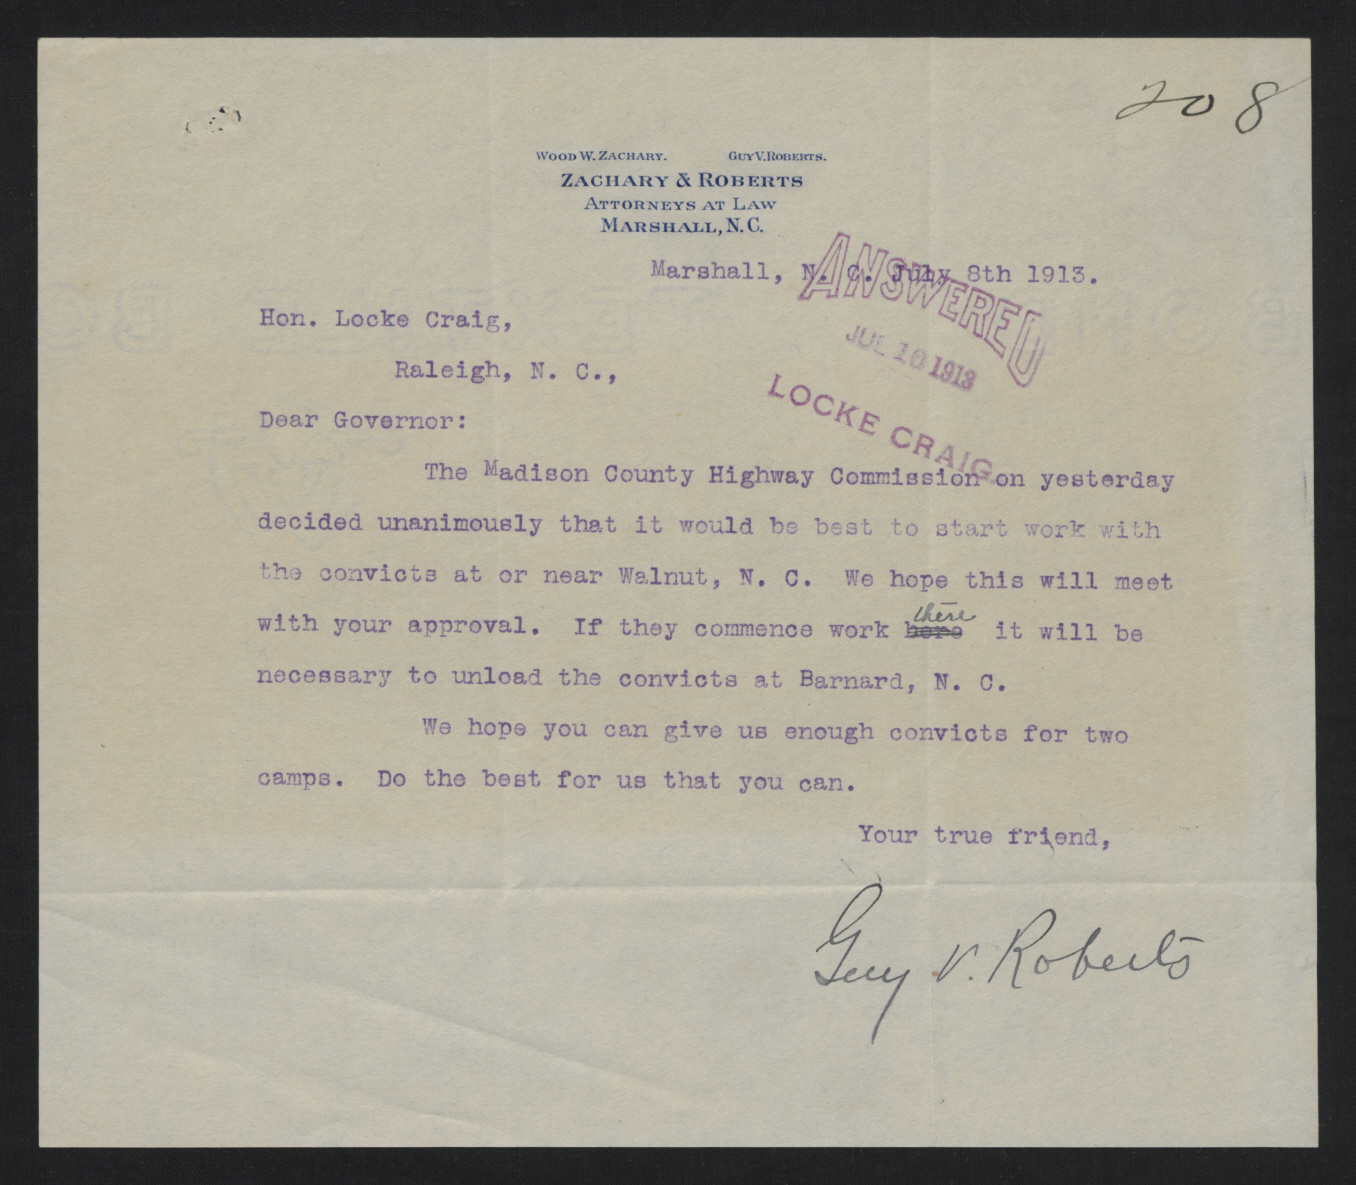 Letter from Roberts to Craig, July 8, 1913